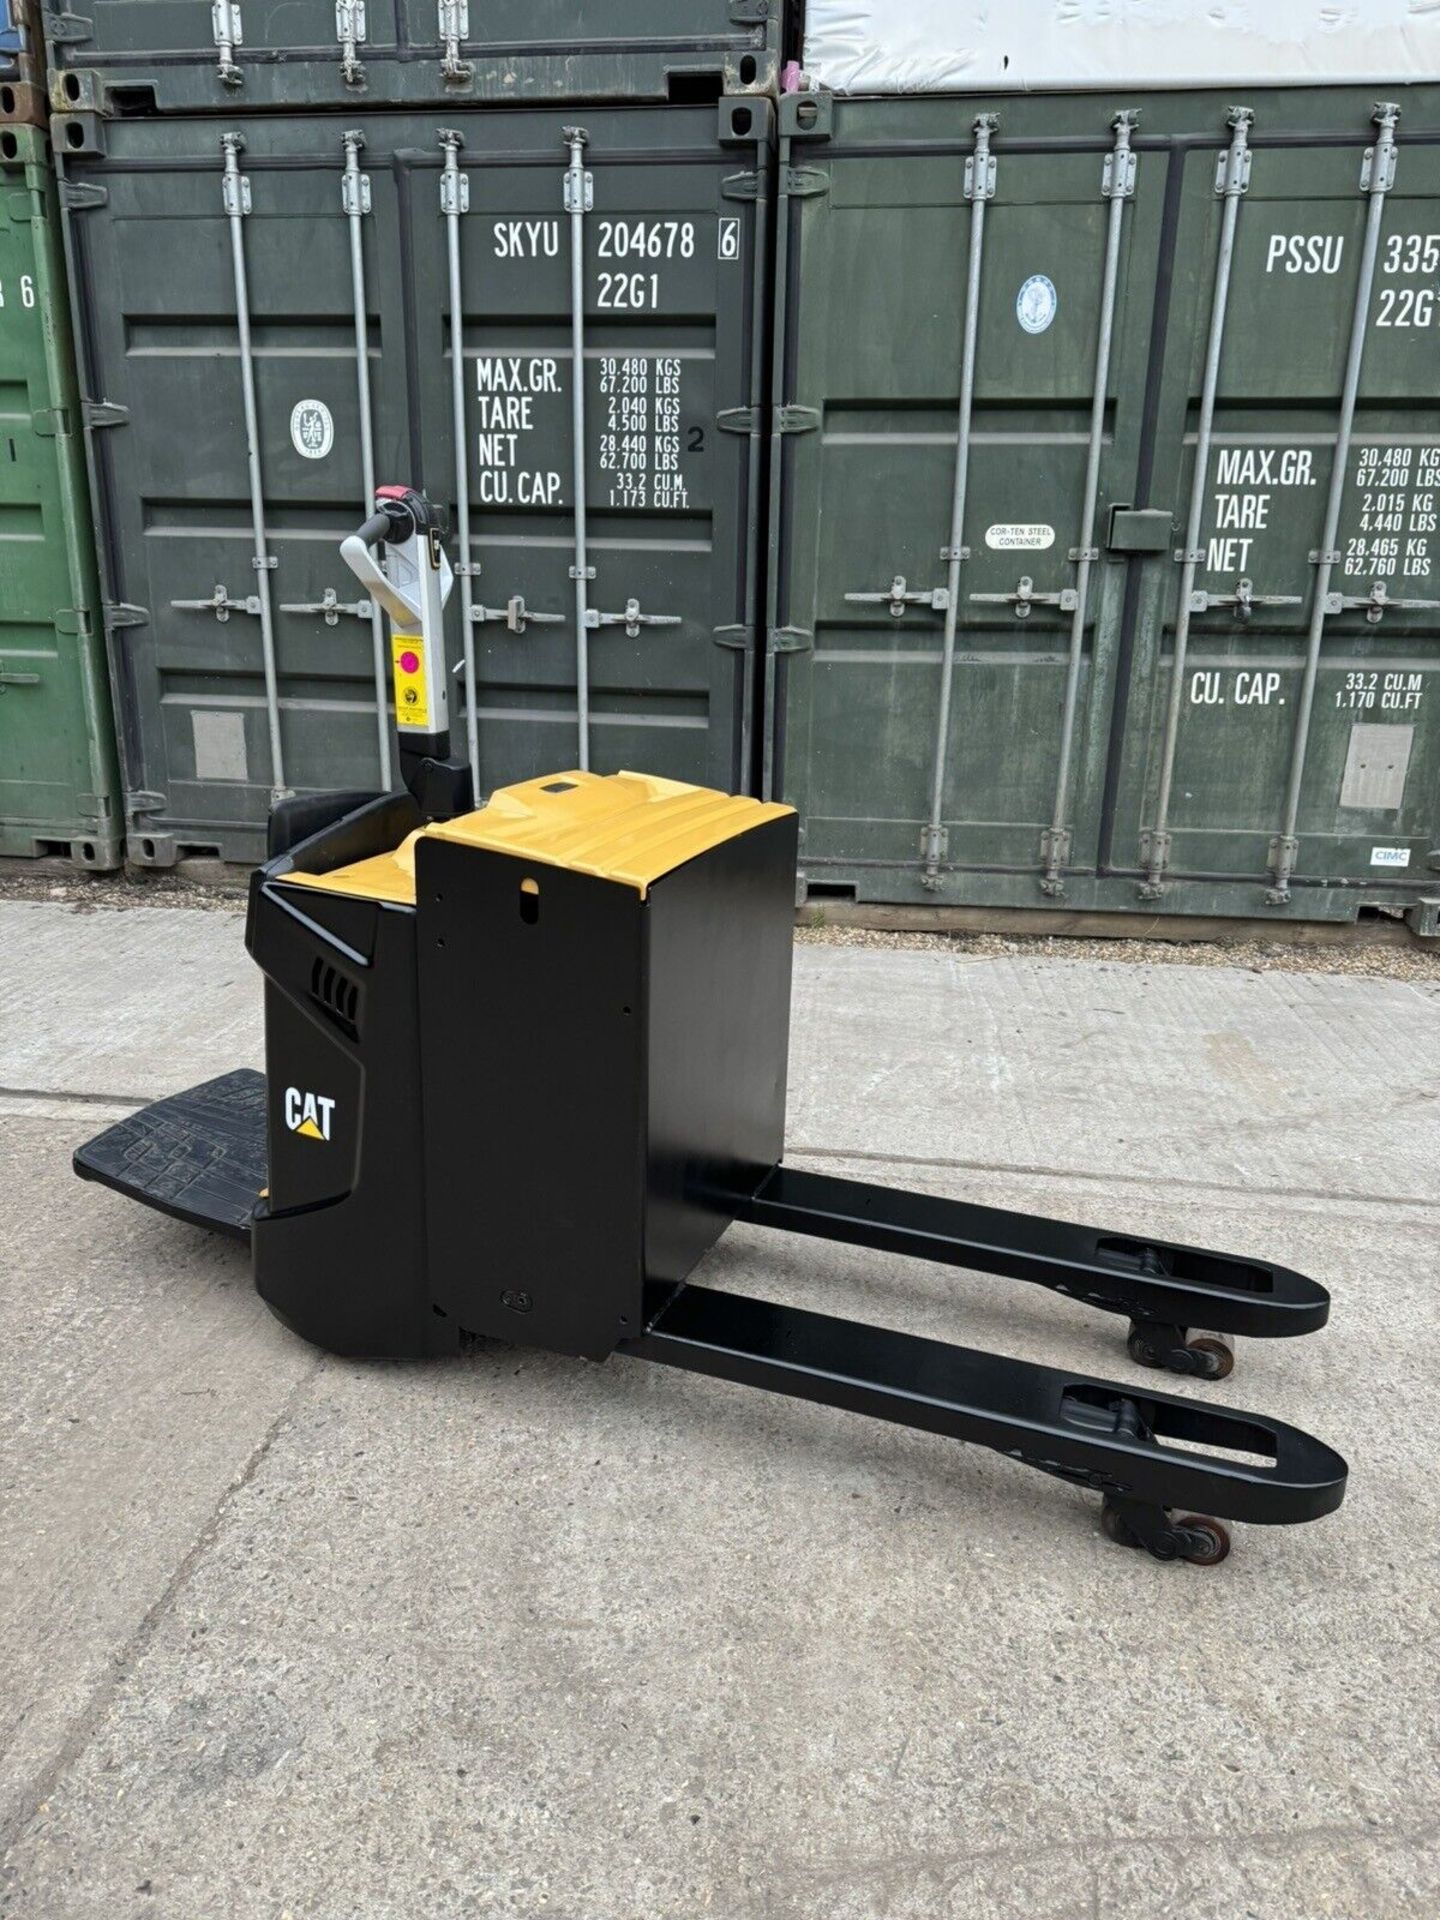 2013, CATERPILLAR 2 Electric Pallet Truck - Image 6 of 6